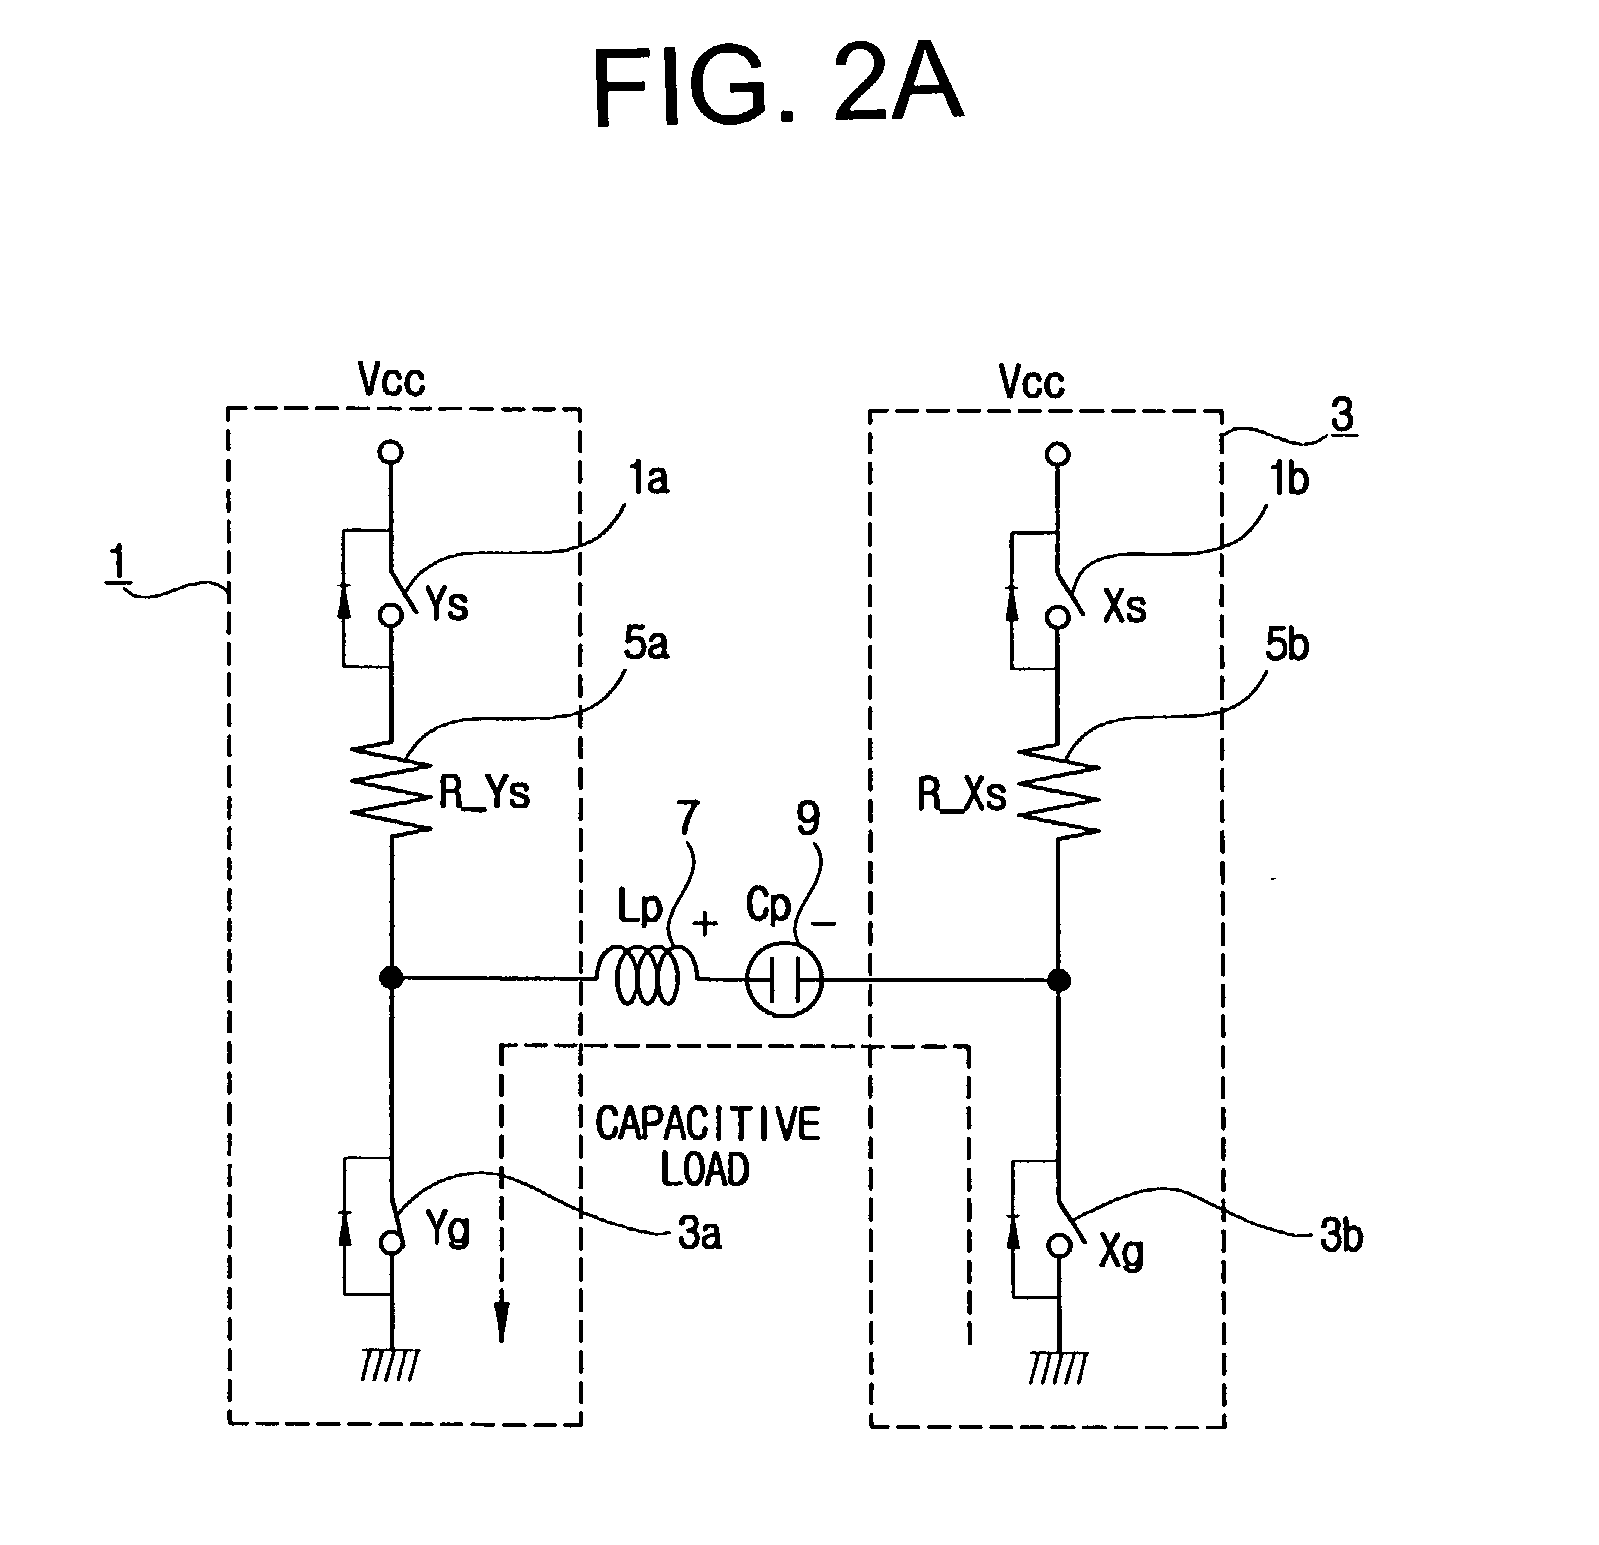 Apparatus and method of recovering reactive power of plasma display panel